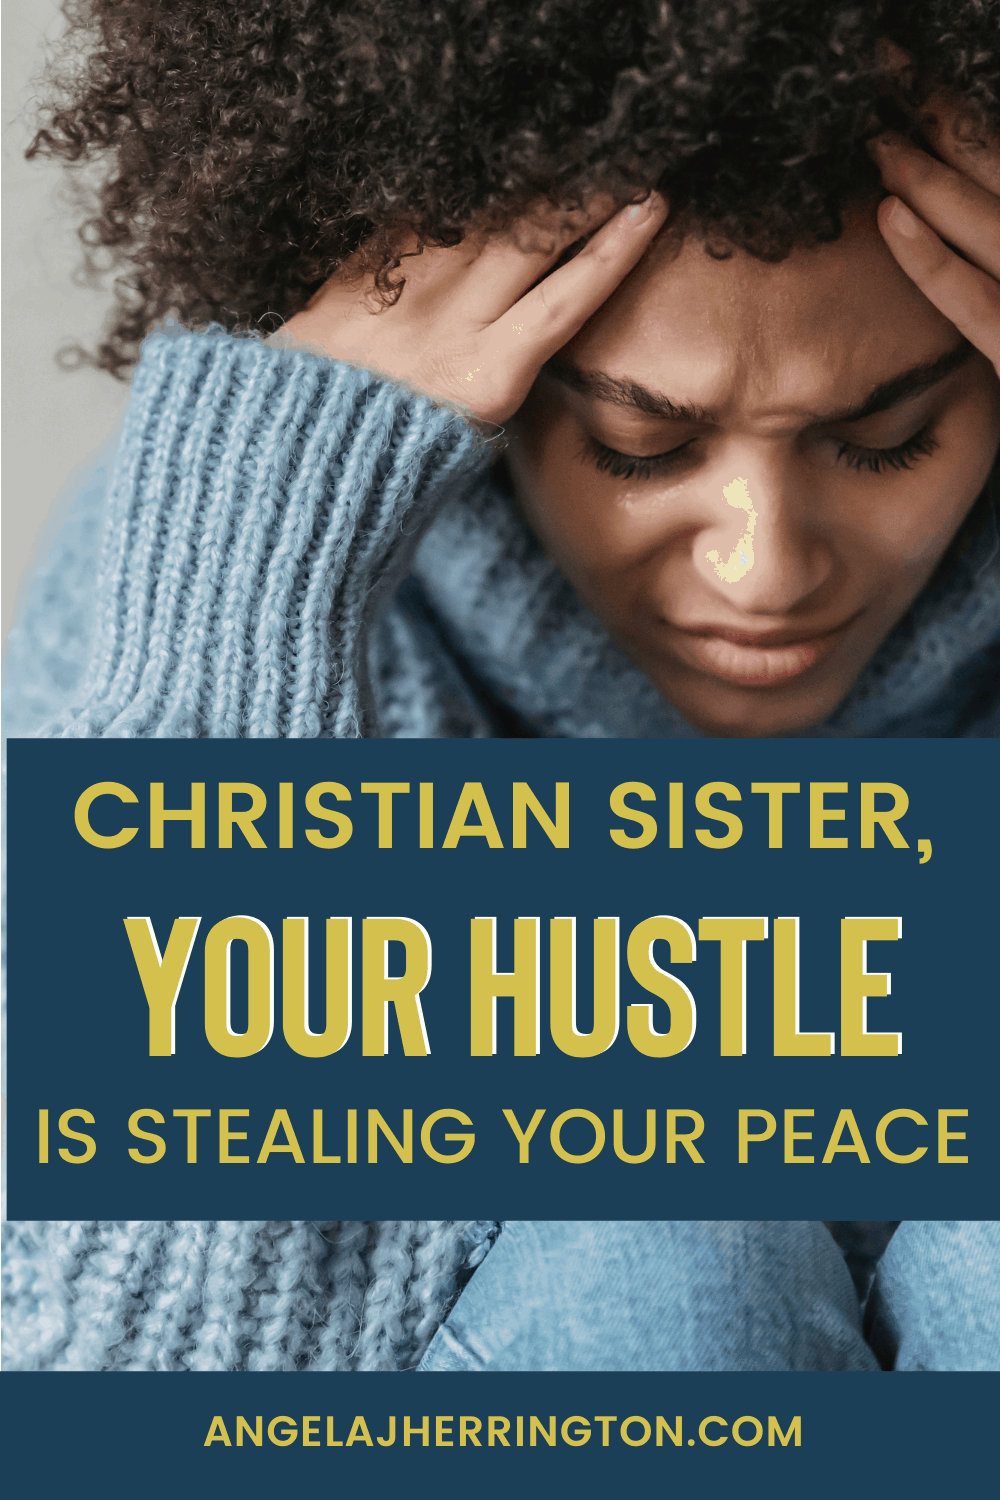 your hustle is stealing your peace and it's toxic religion's fault